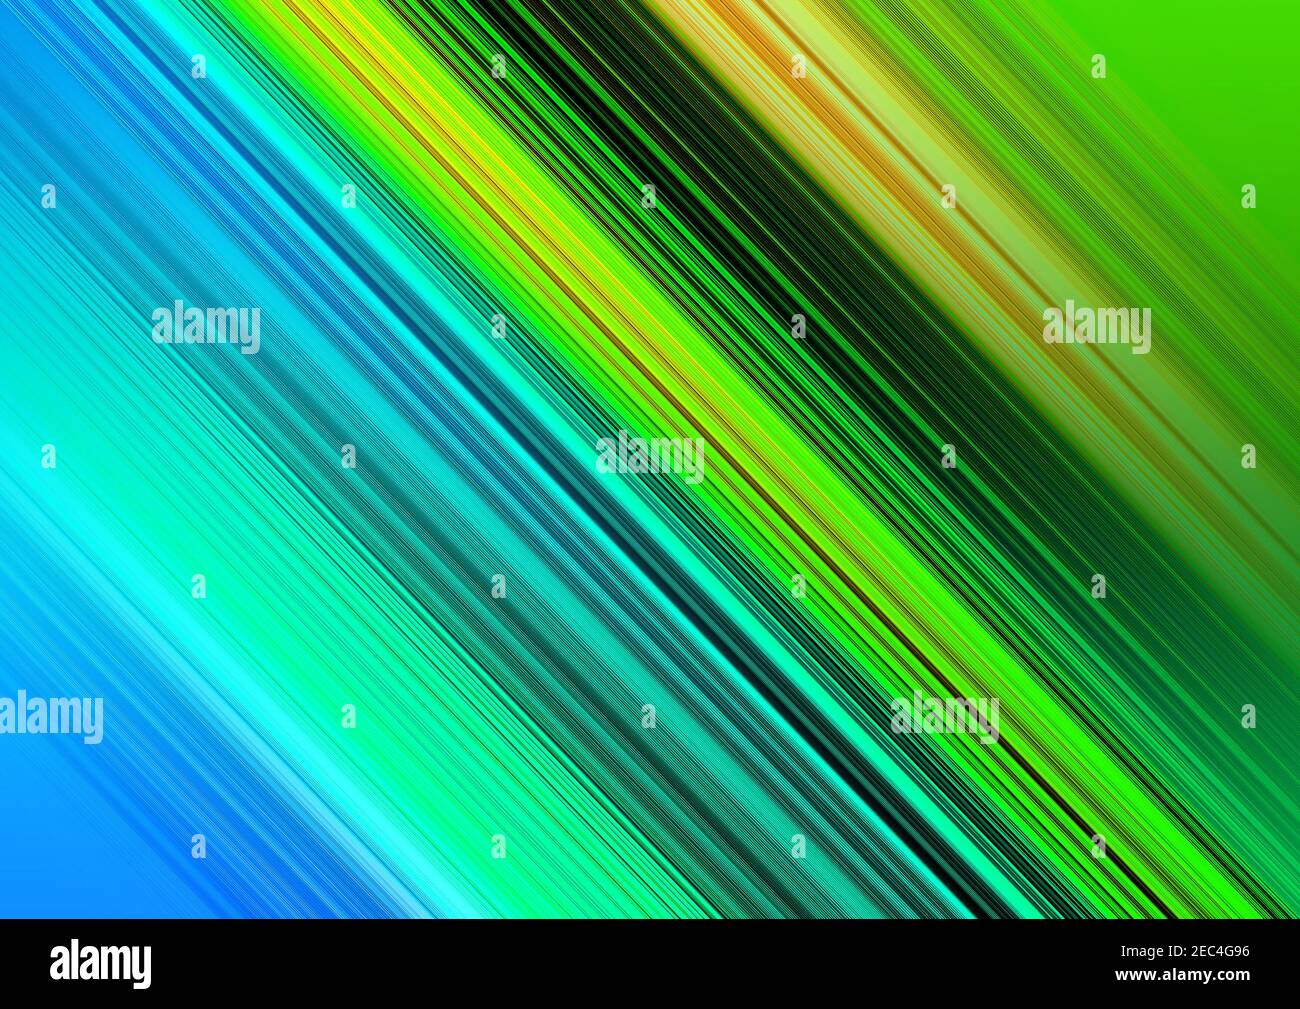 green yellow blue black motion blur abstract background Stock Photo